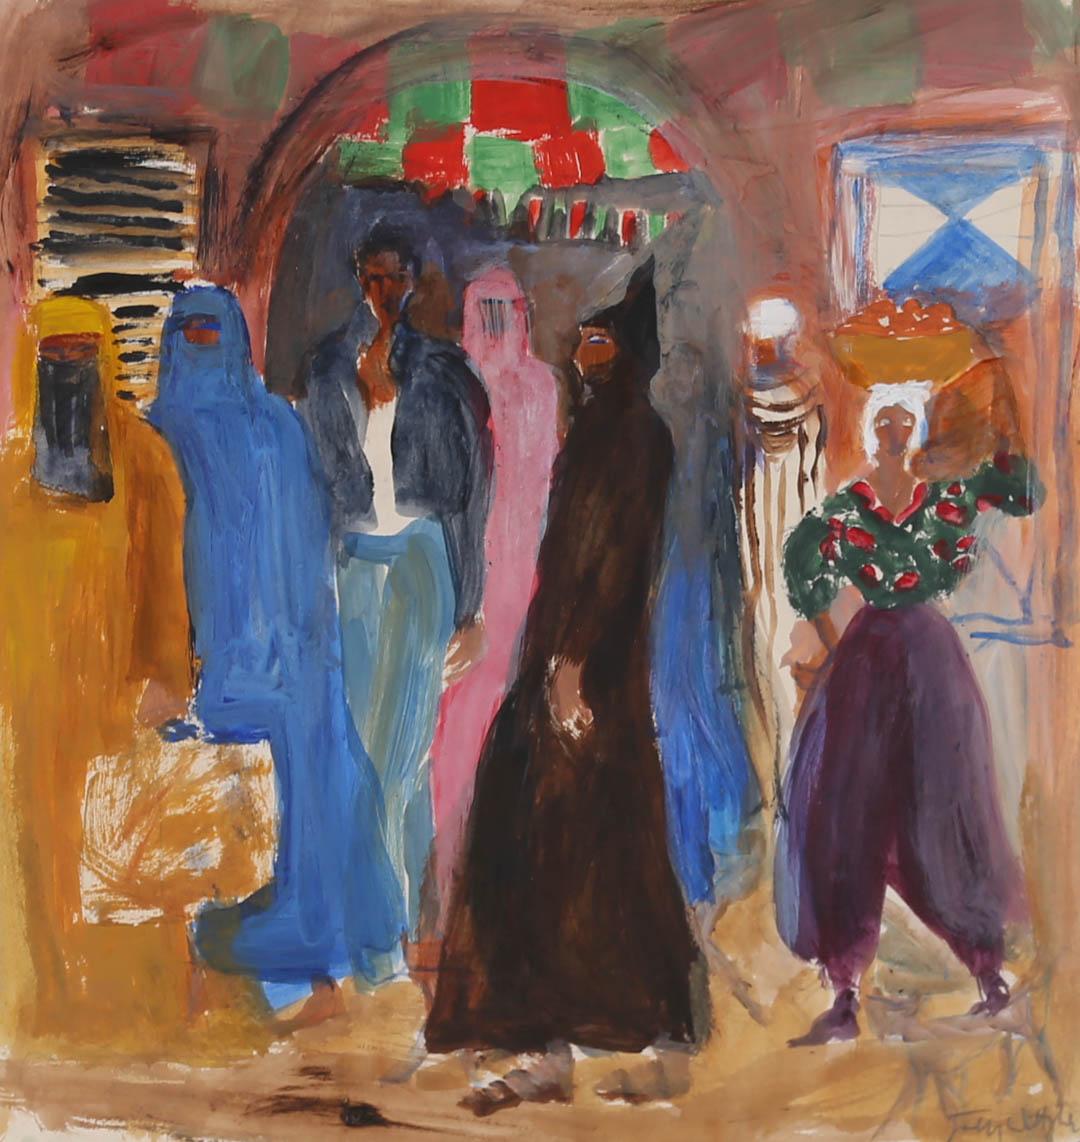 This colourful scene depicts a busy street with tall figures passing street sellers under an arched doorway. the artist uses a bright colour palette to capture this bustling scene, embracing an expressive style to capture the movement the movement